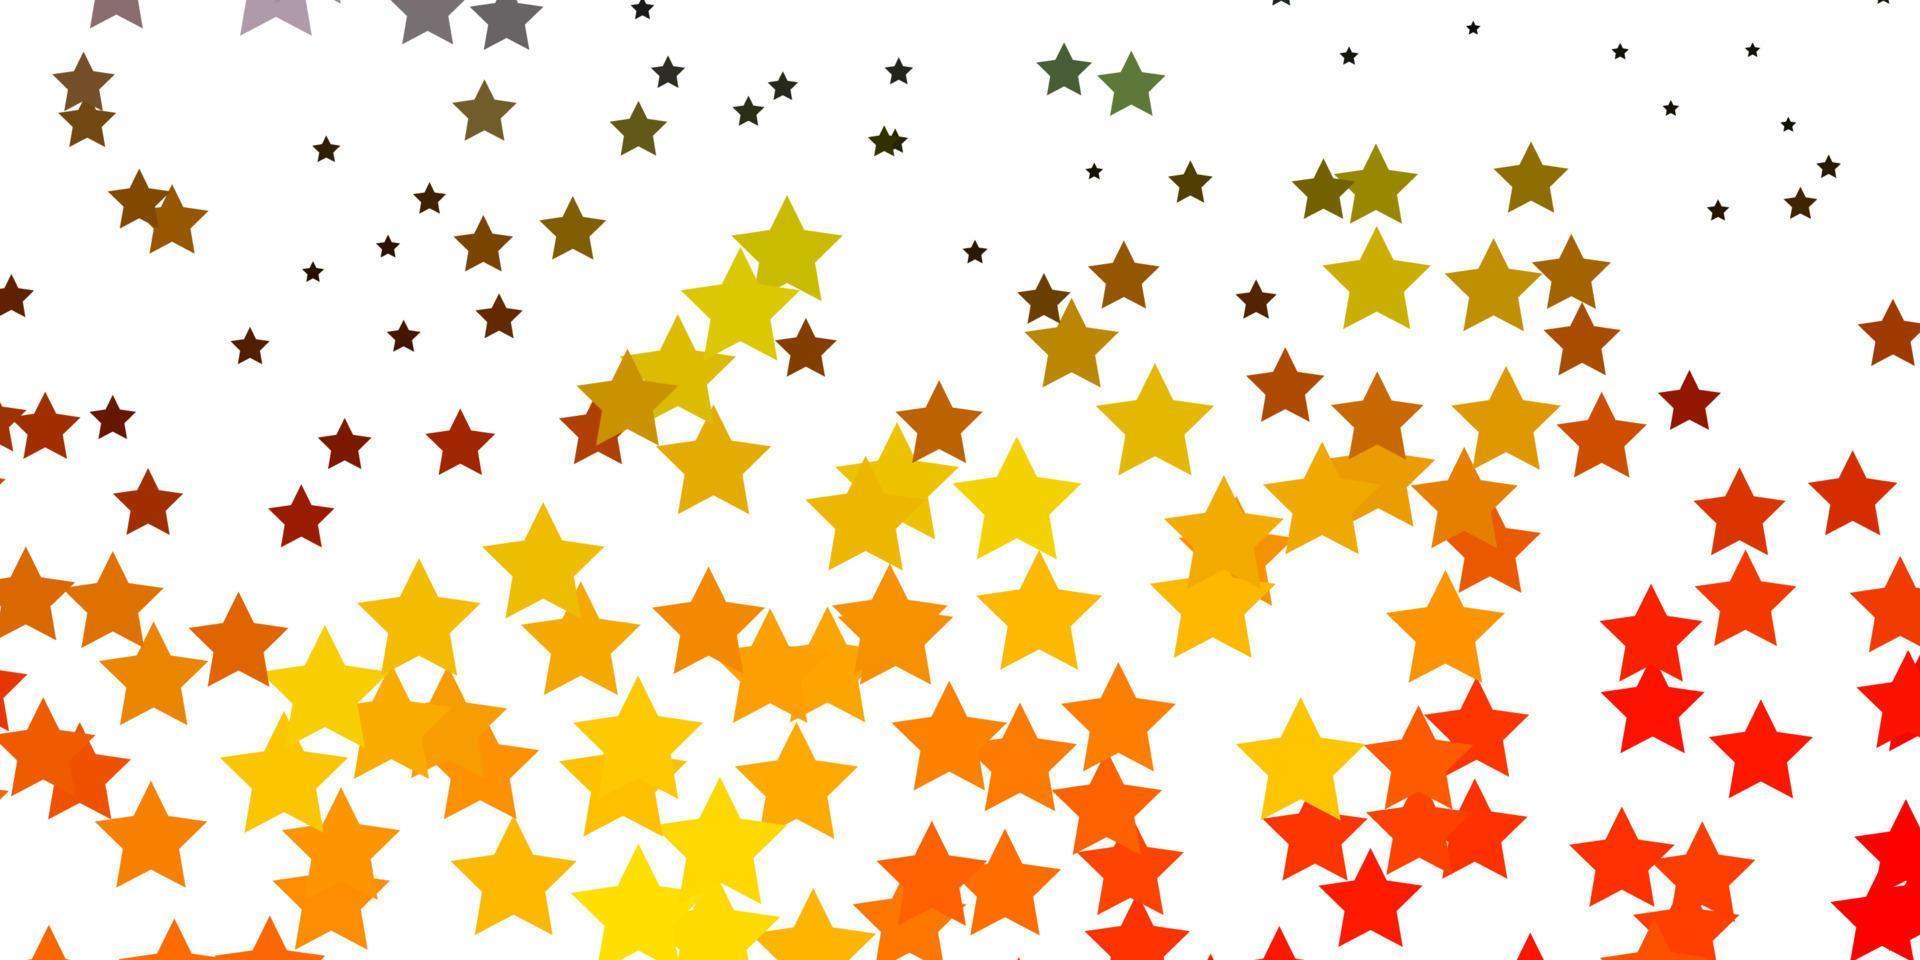 Light Multicolor vector pattern with abstract stars.